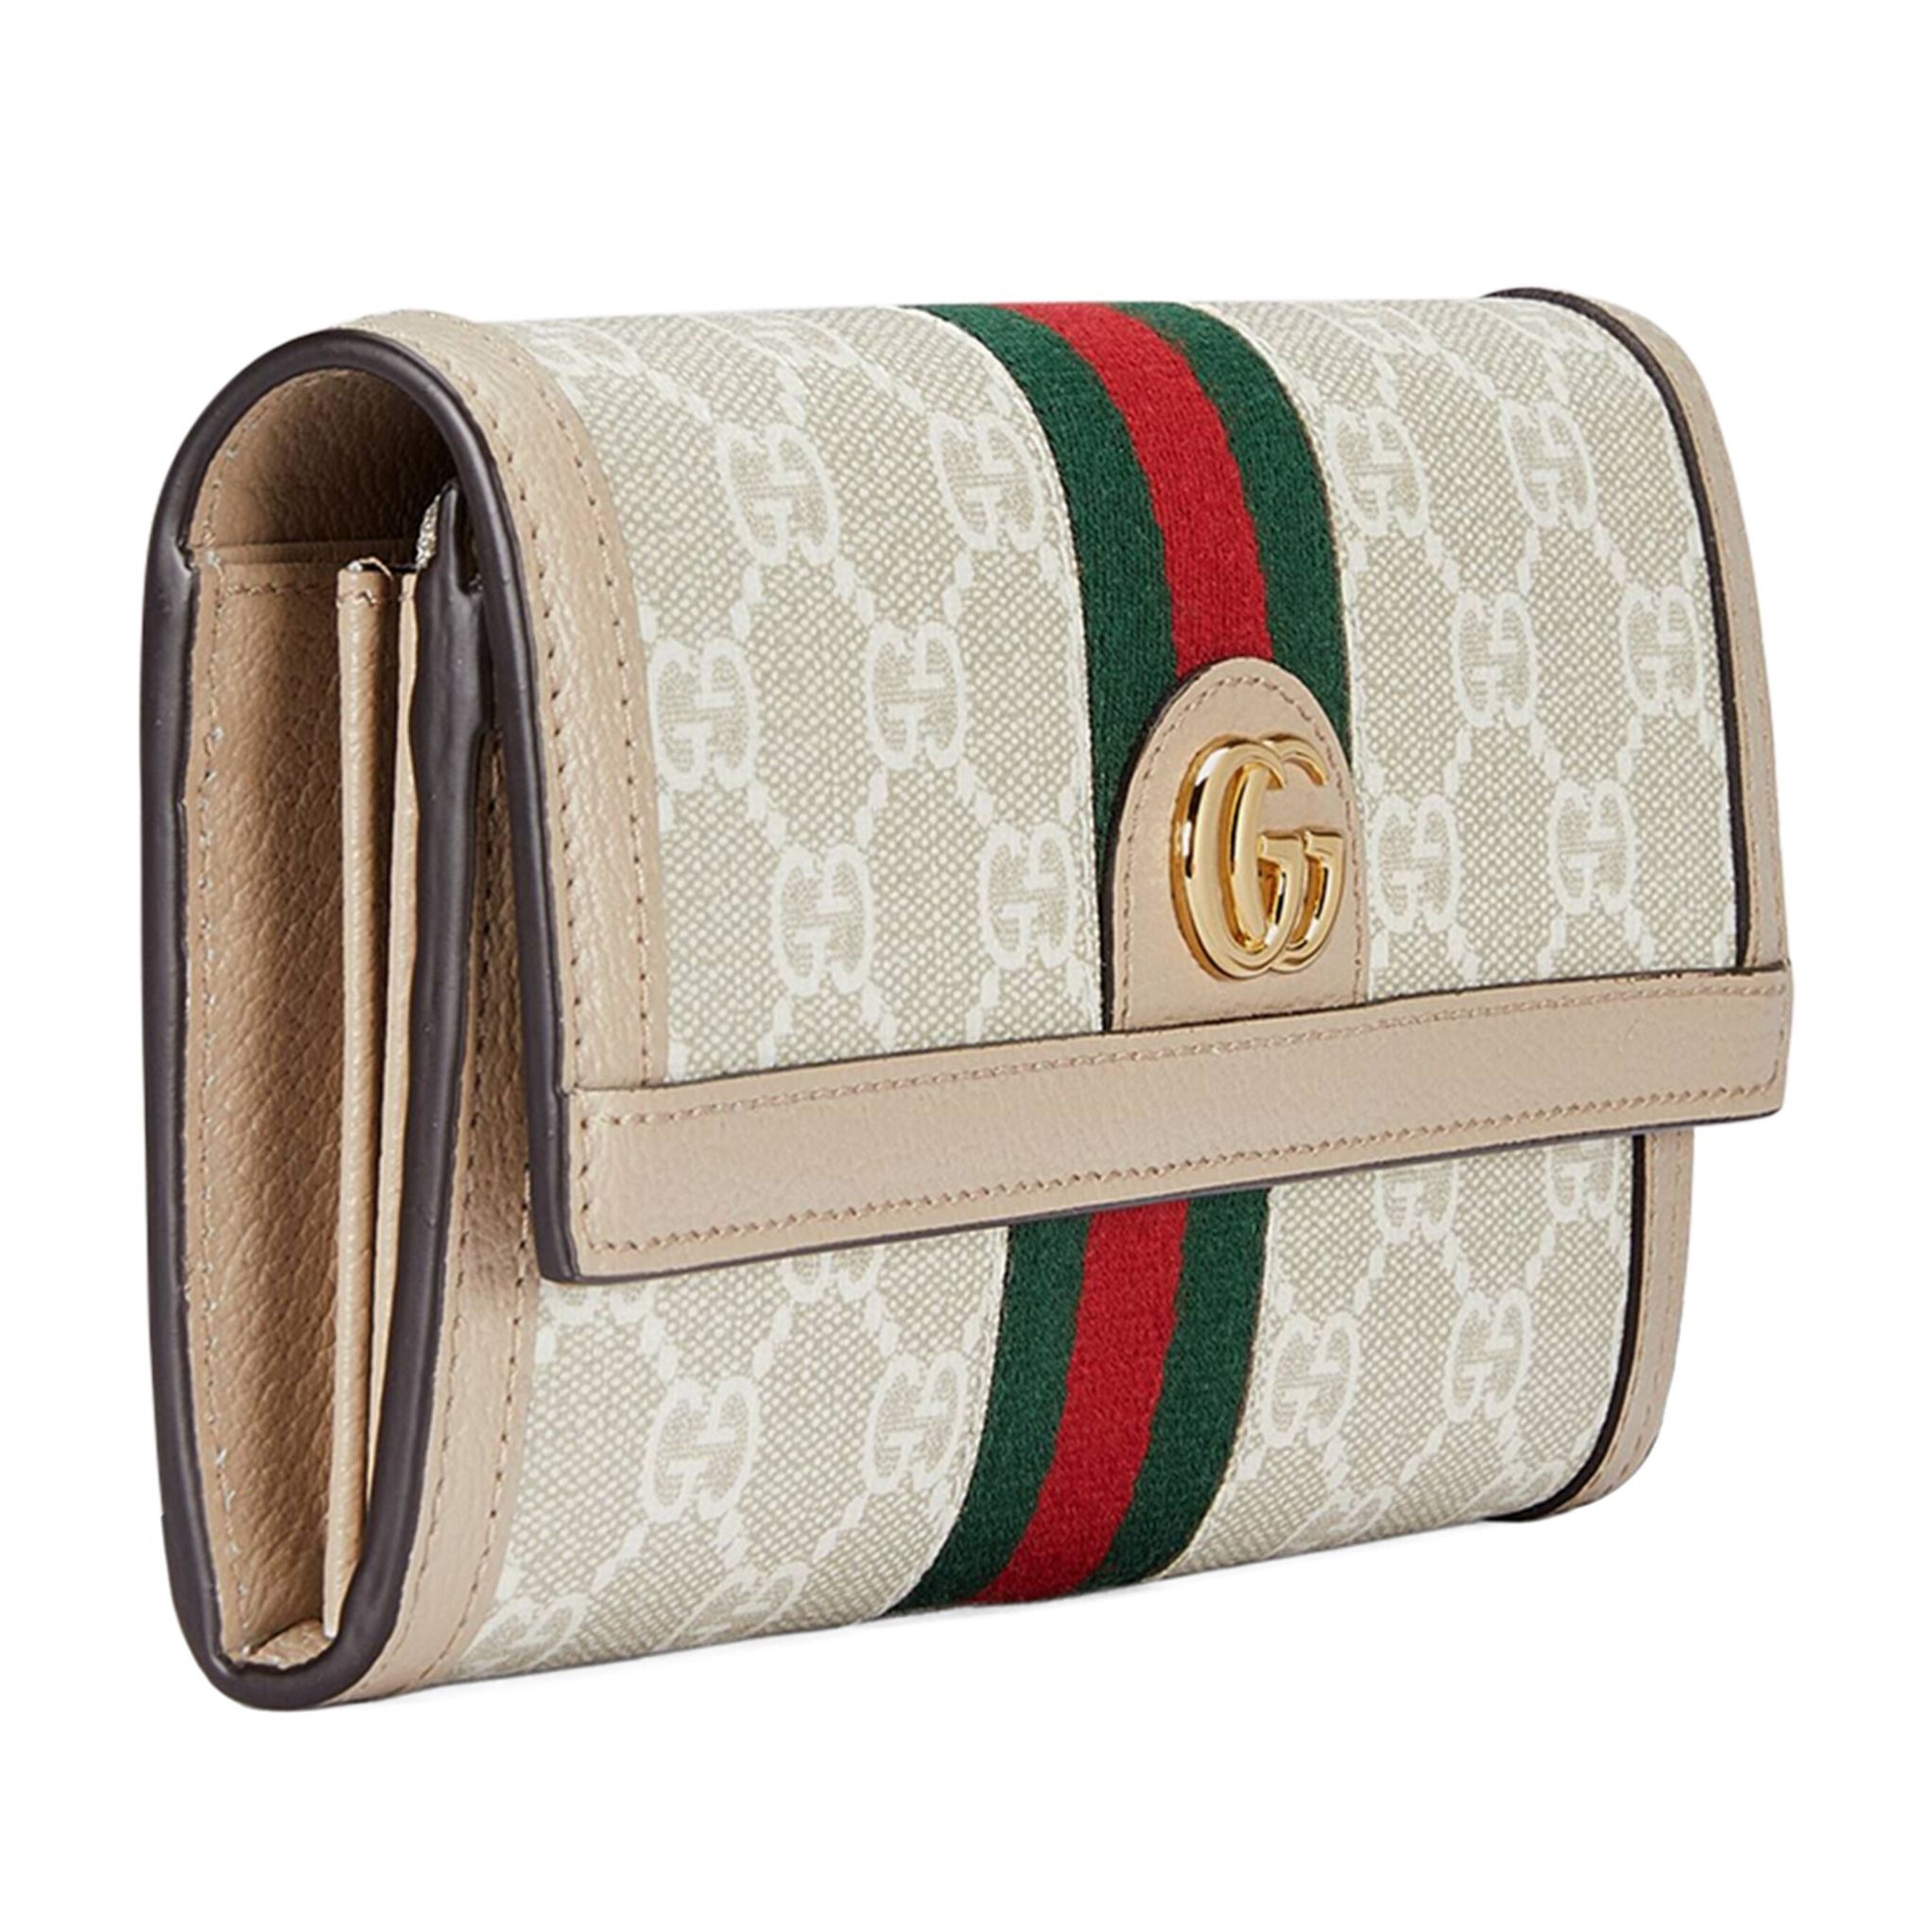 VÍ NỮ DÀI NẤP GẬP GUCCI OPHIDIA GG CONTINENTAL WALLET WITH BEIGE AND WHITE GG SUPREME CANVAS 11